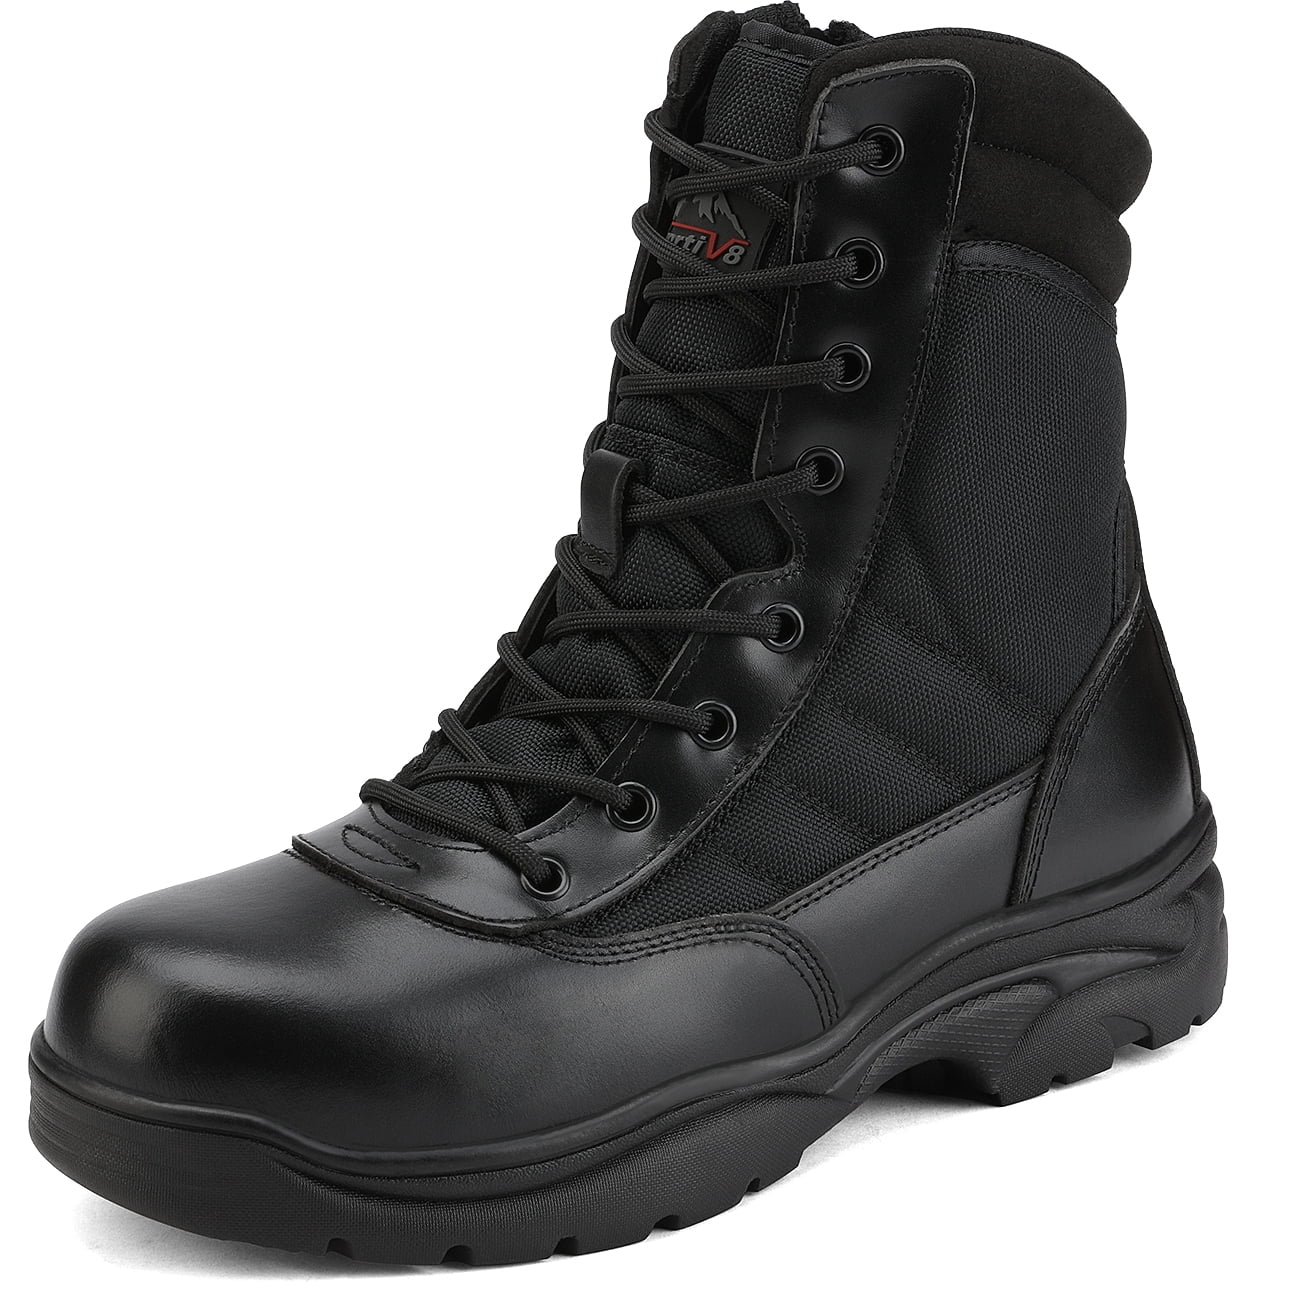 MENS COMBAT POLICE ARMY CADET TACTICAL ZIP STEEL TOE CAP SAFETY WORK BOOTS SHOES 